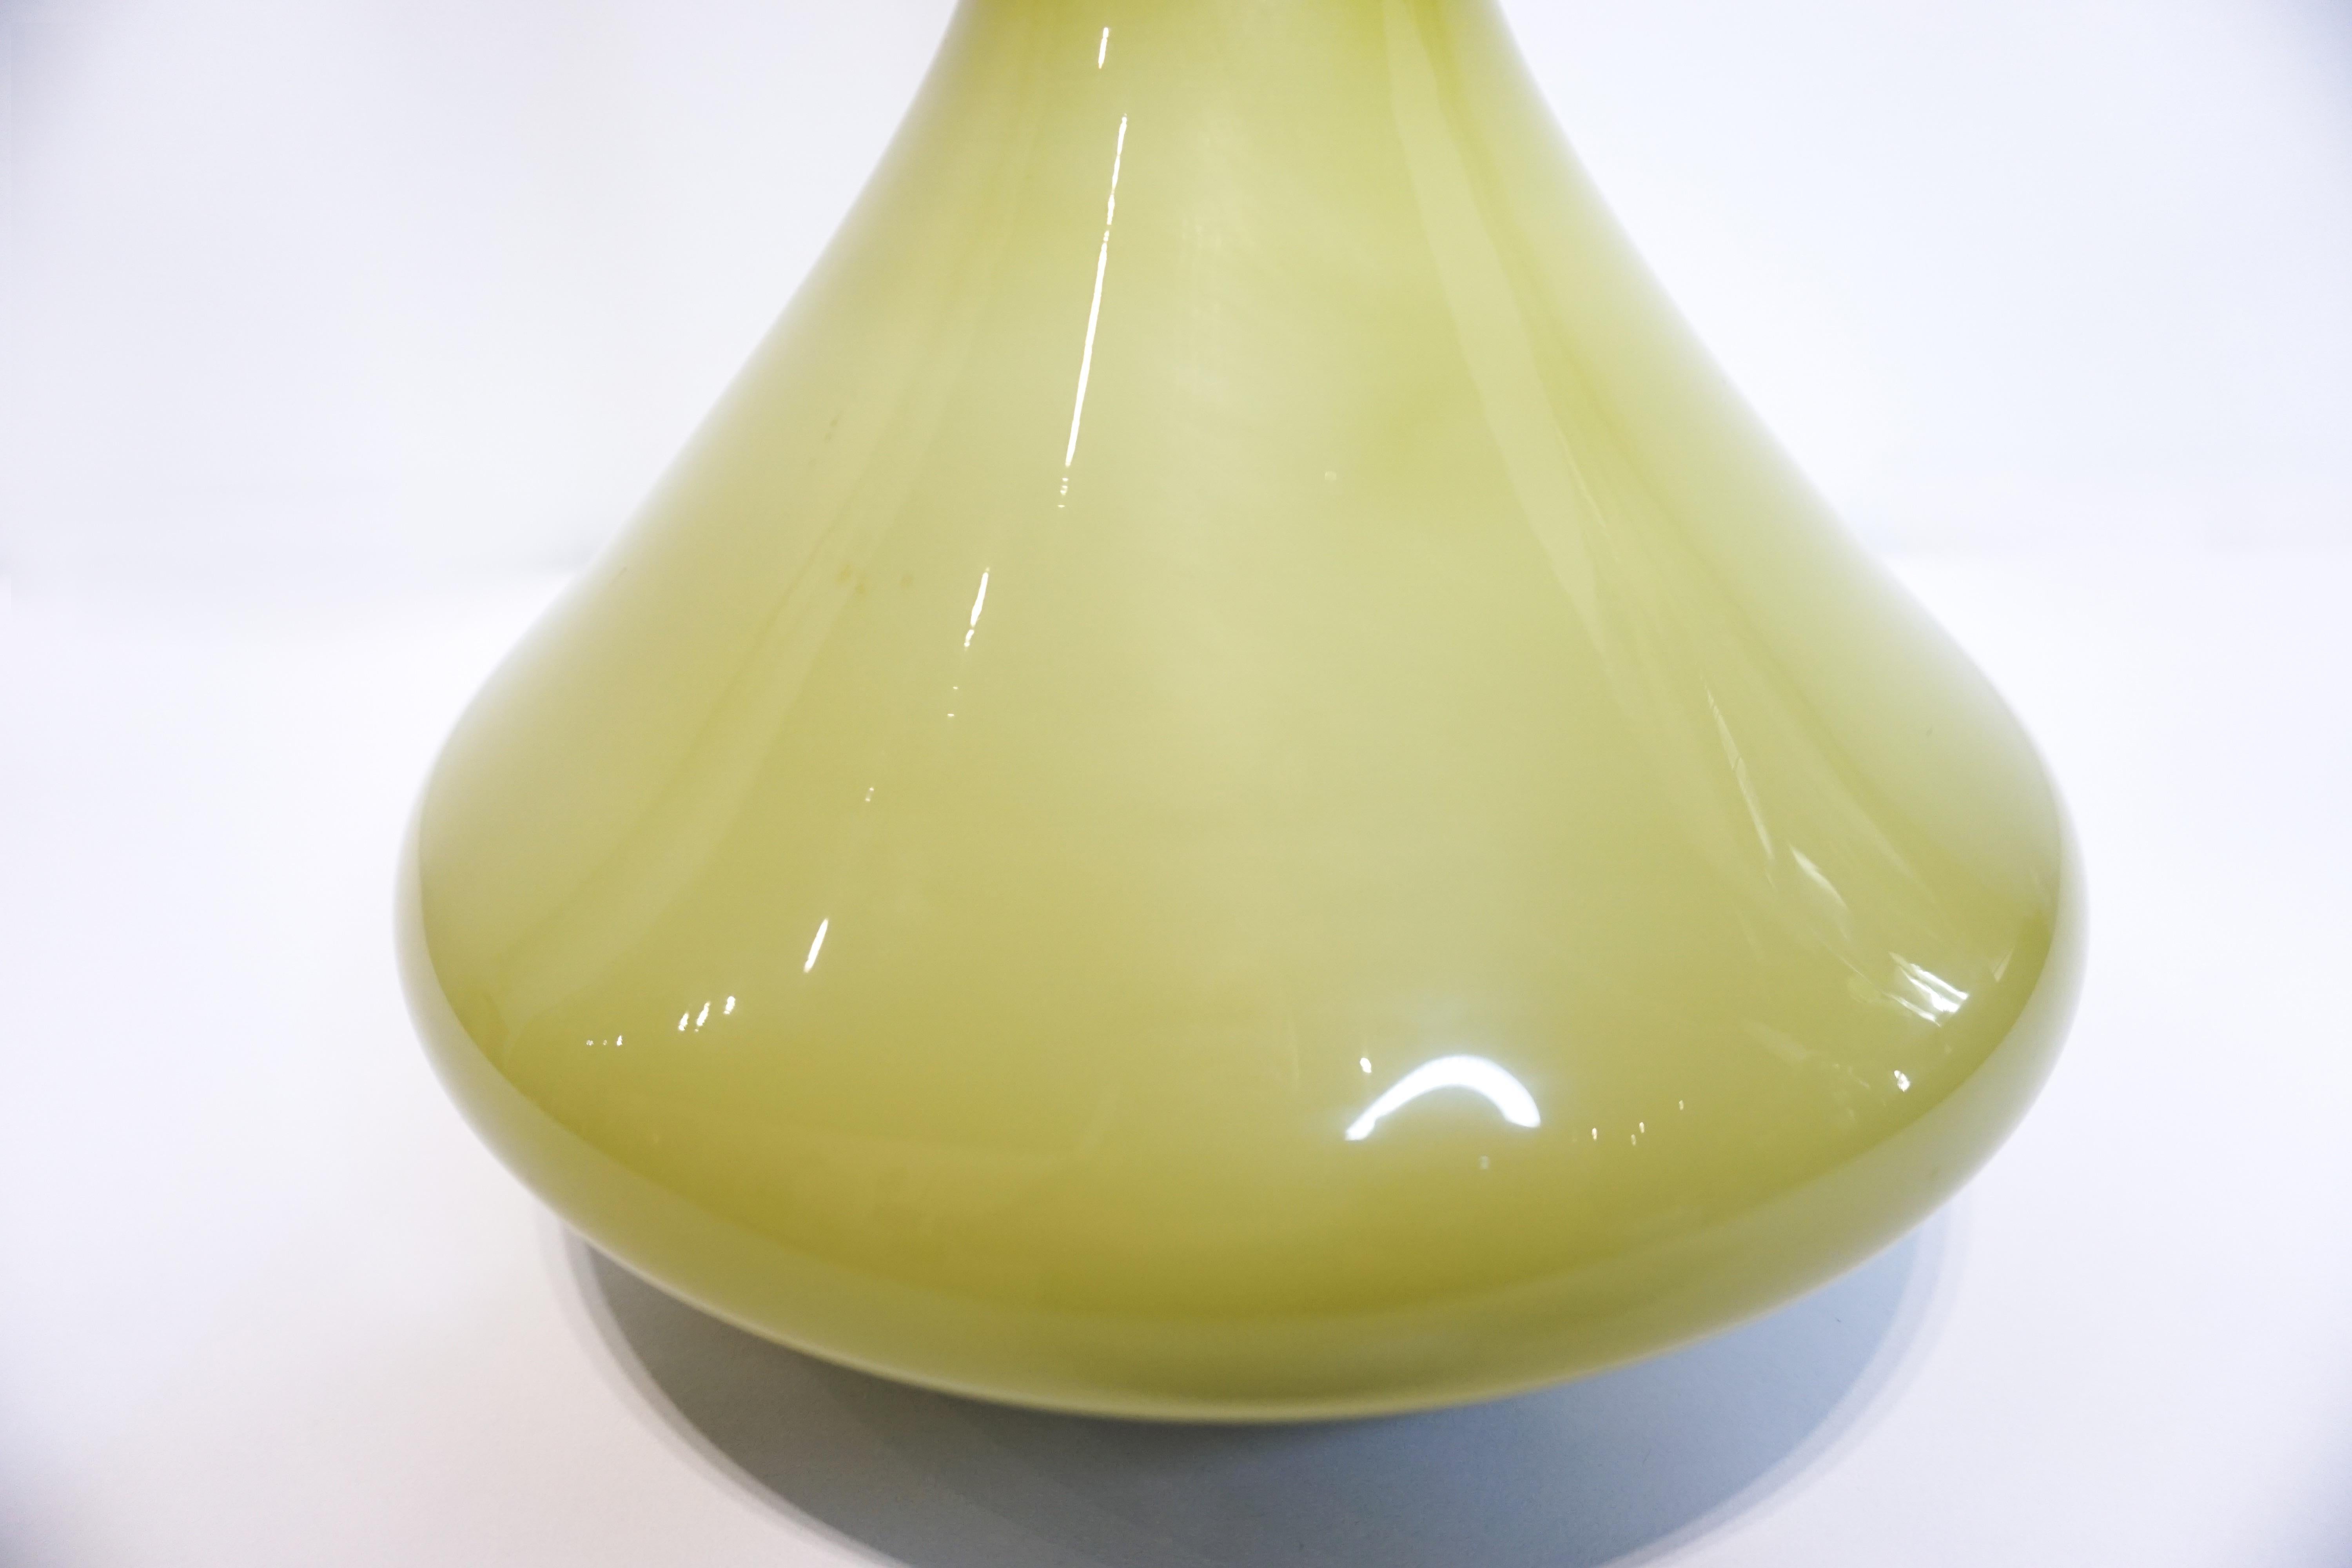 Pea green vintage murano glass vase will leave others envious. On a table, bedside, bookcase or as an occasional vase, this piece makes a lovely statement.